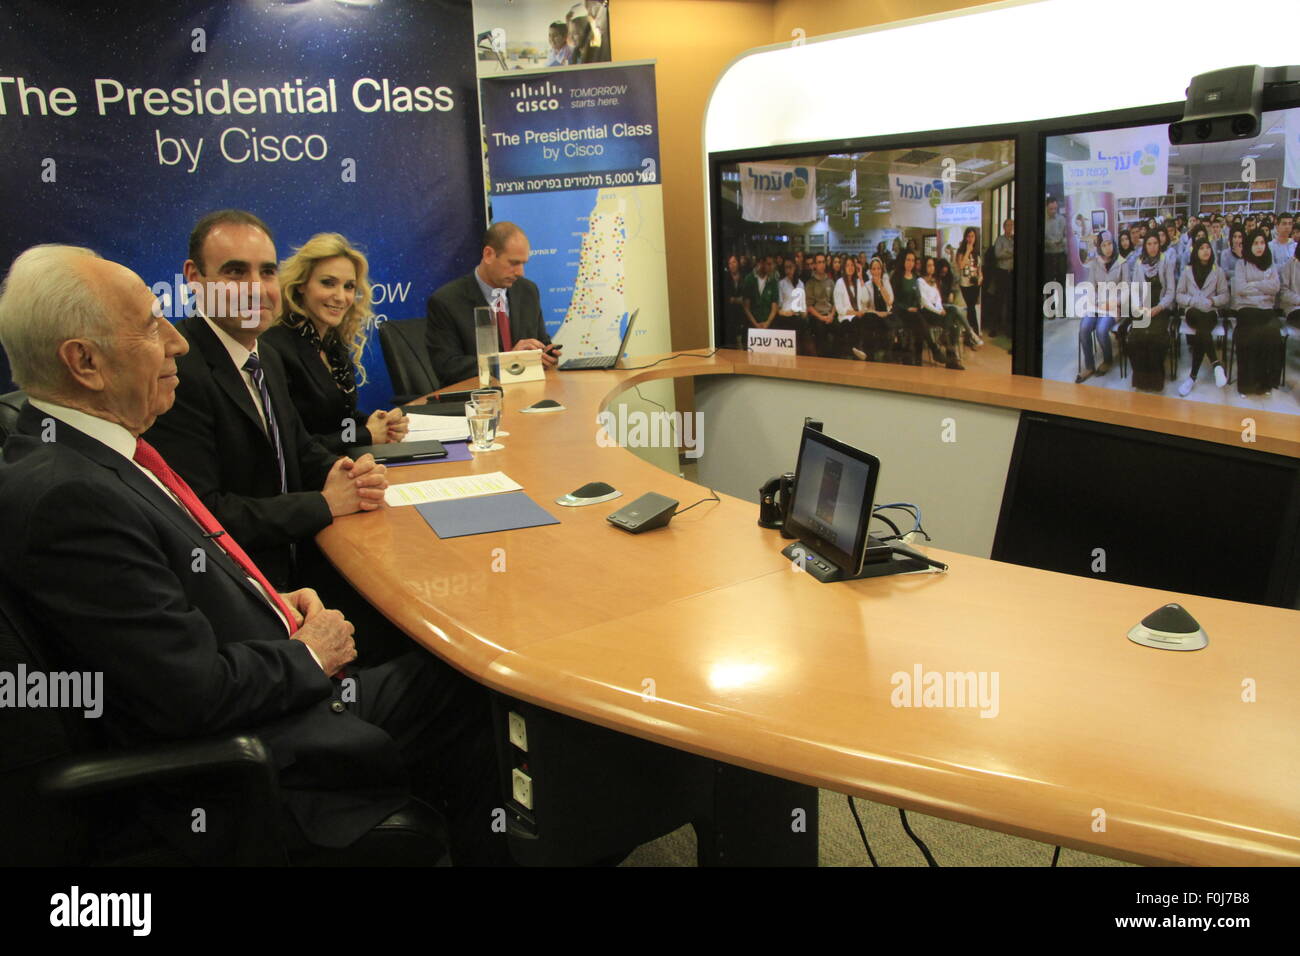 President Shimon Peres delivered the largest online civics class in the world from Cisco's Headquarters in Israel, setting a new Guinness World Record Stock Photo